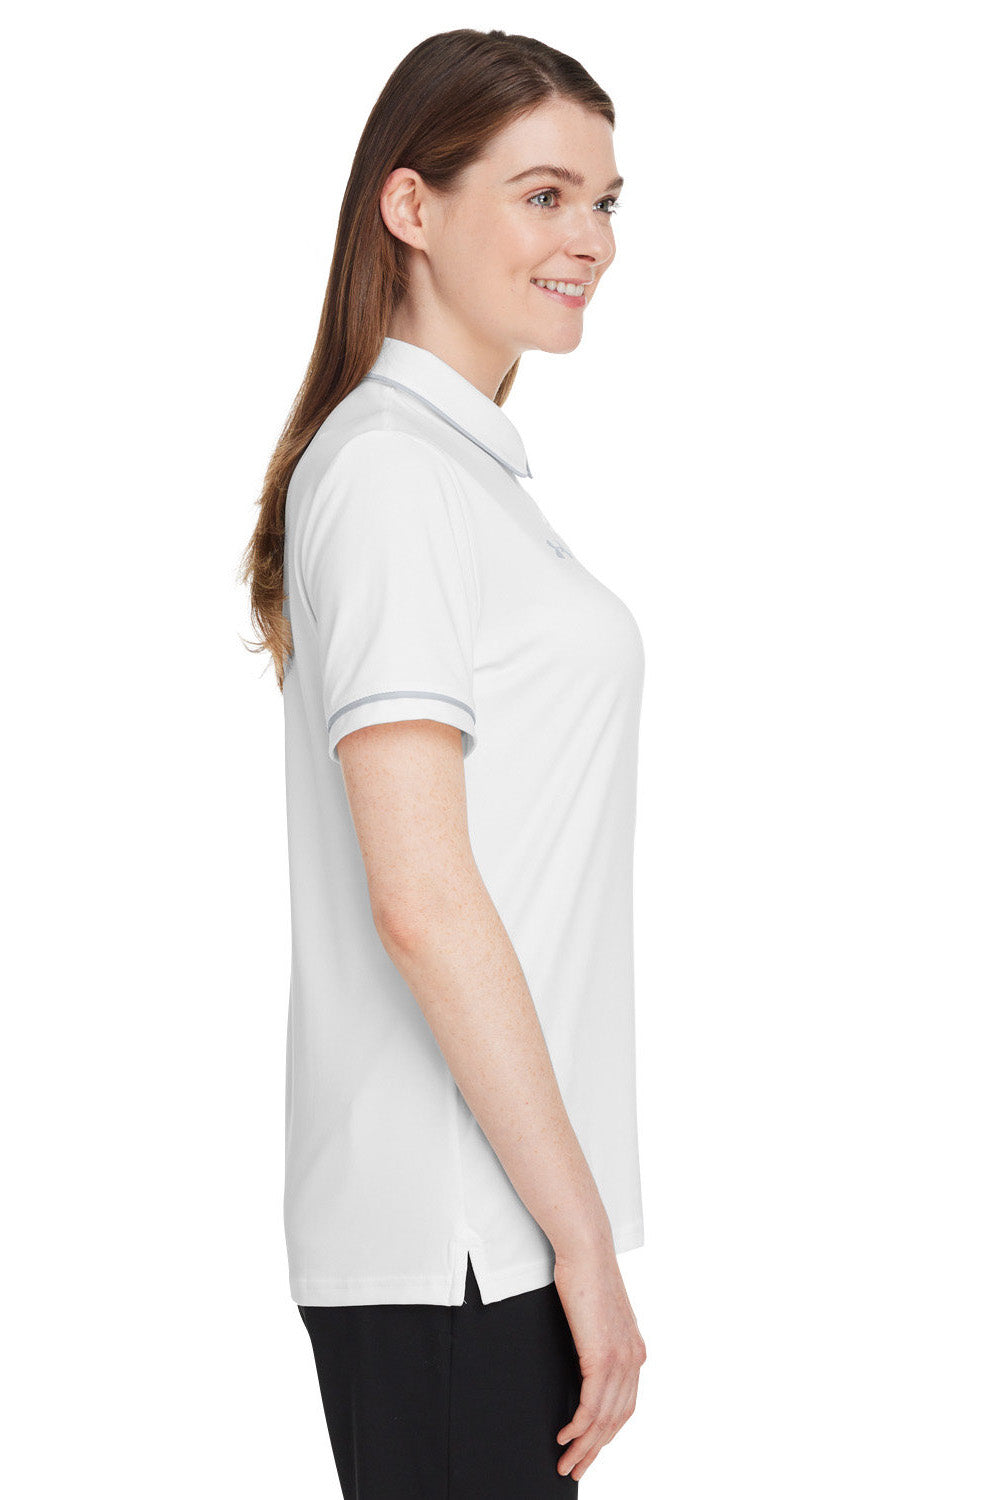 Under Armour 1376905 Womens Teams Performance Moisture Wicking Short Sleeve Polo Shirt White Model Side